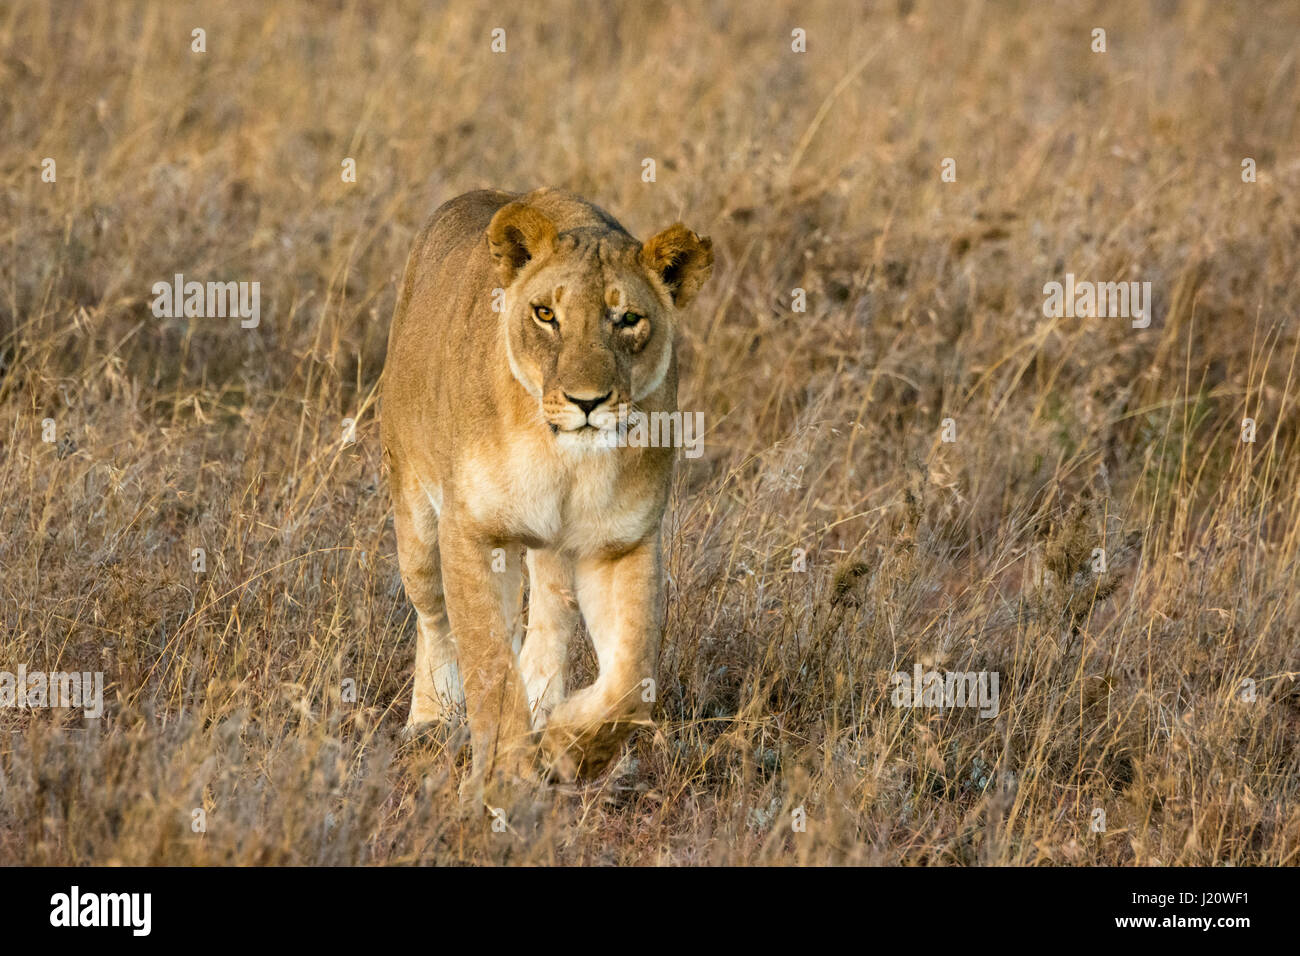 One-eyed wild Lioness, Panthera leo, walking towards and looking at camera, Ol Pejeta Conservancy, Kenya, East Africa, Female lion hunting. Stock Photo